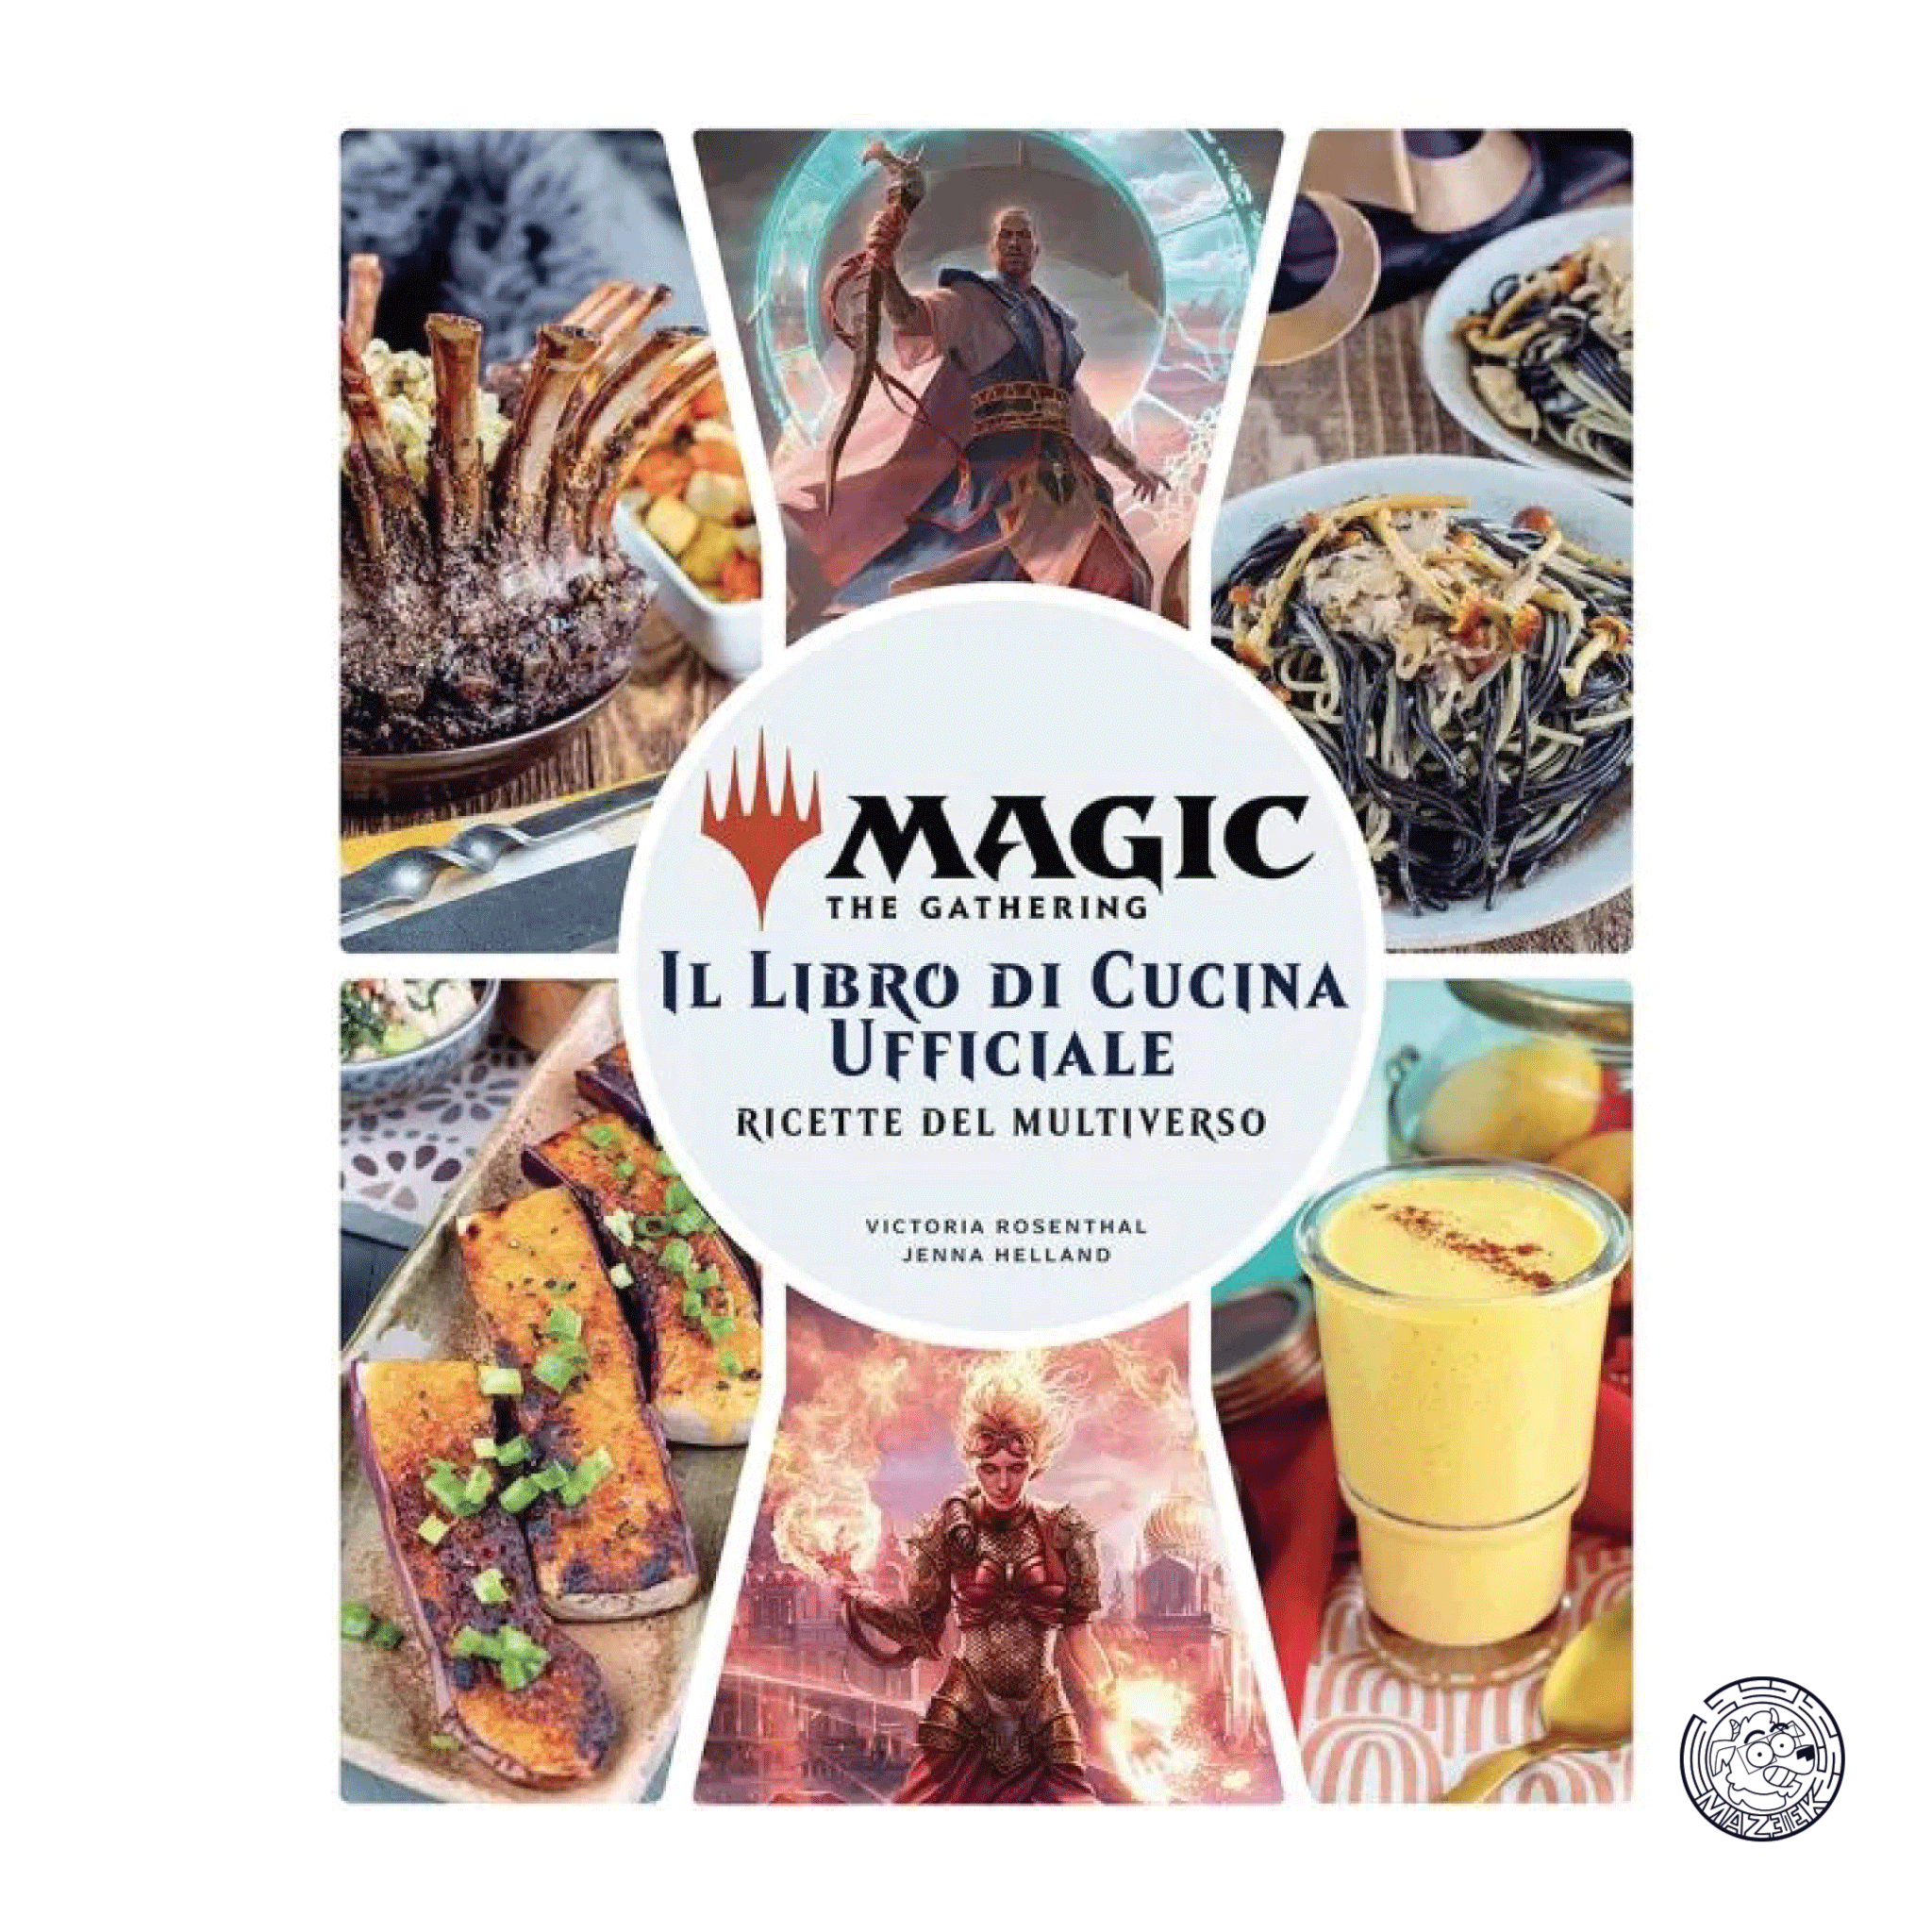 Magic: The Gathering – The Official Cookbook